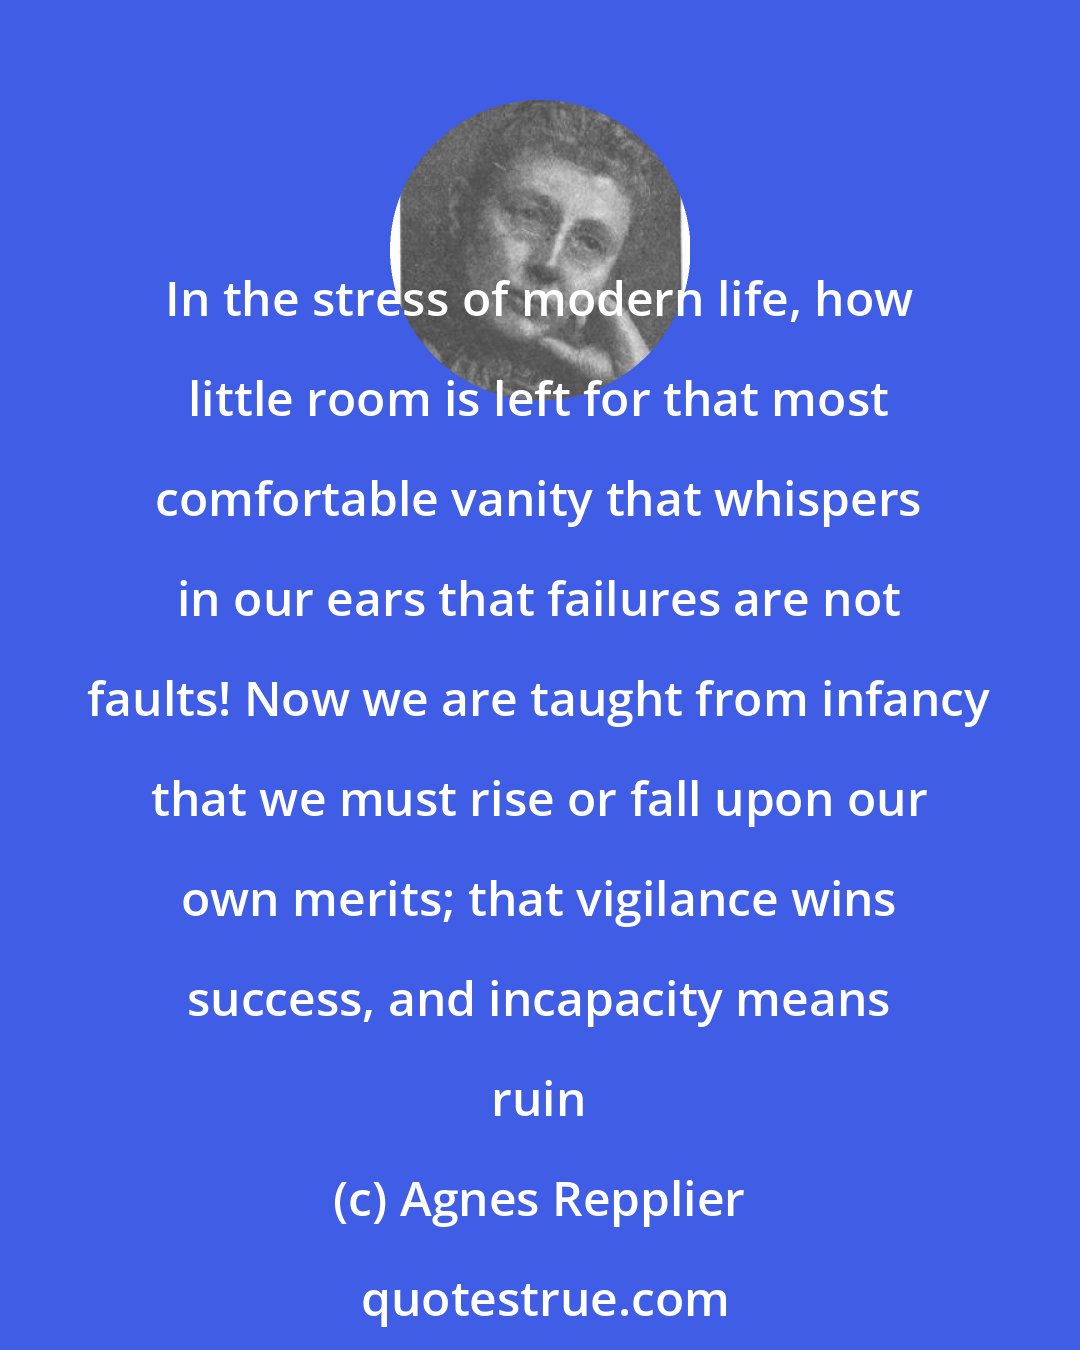 Agnes Repplier: In the stress of modern life, how little room is left for that most comfortable vanity that whispers in our ears that failures are not faults! Now we are taught from infancy that we must rise or fall upon our own merits; that vigilance wins success, and incapacity means ruin